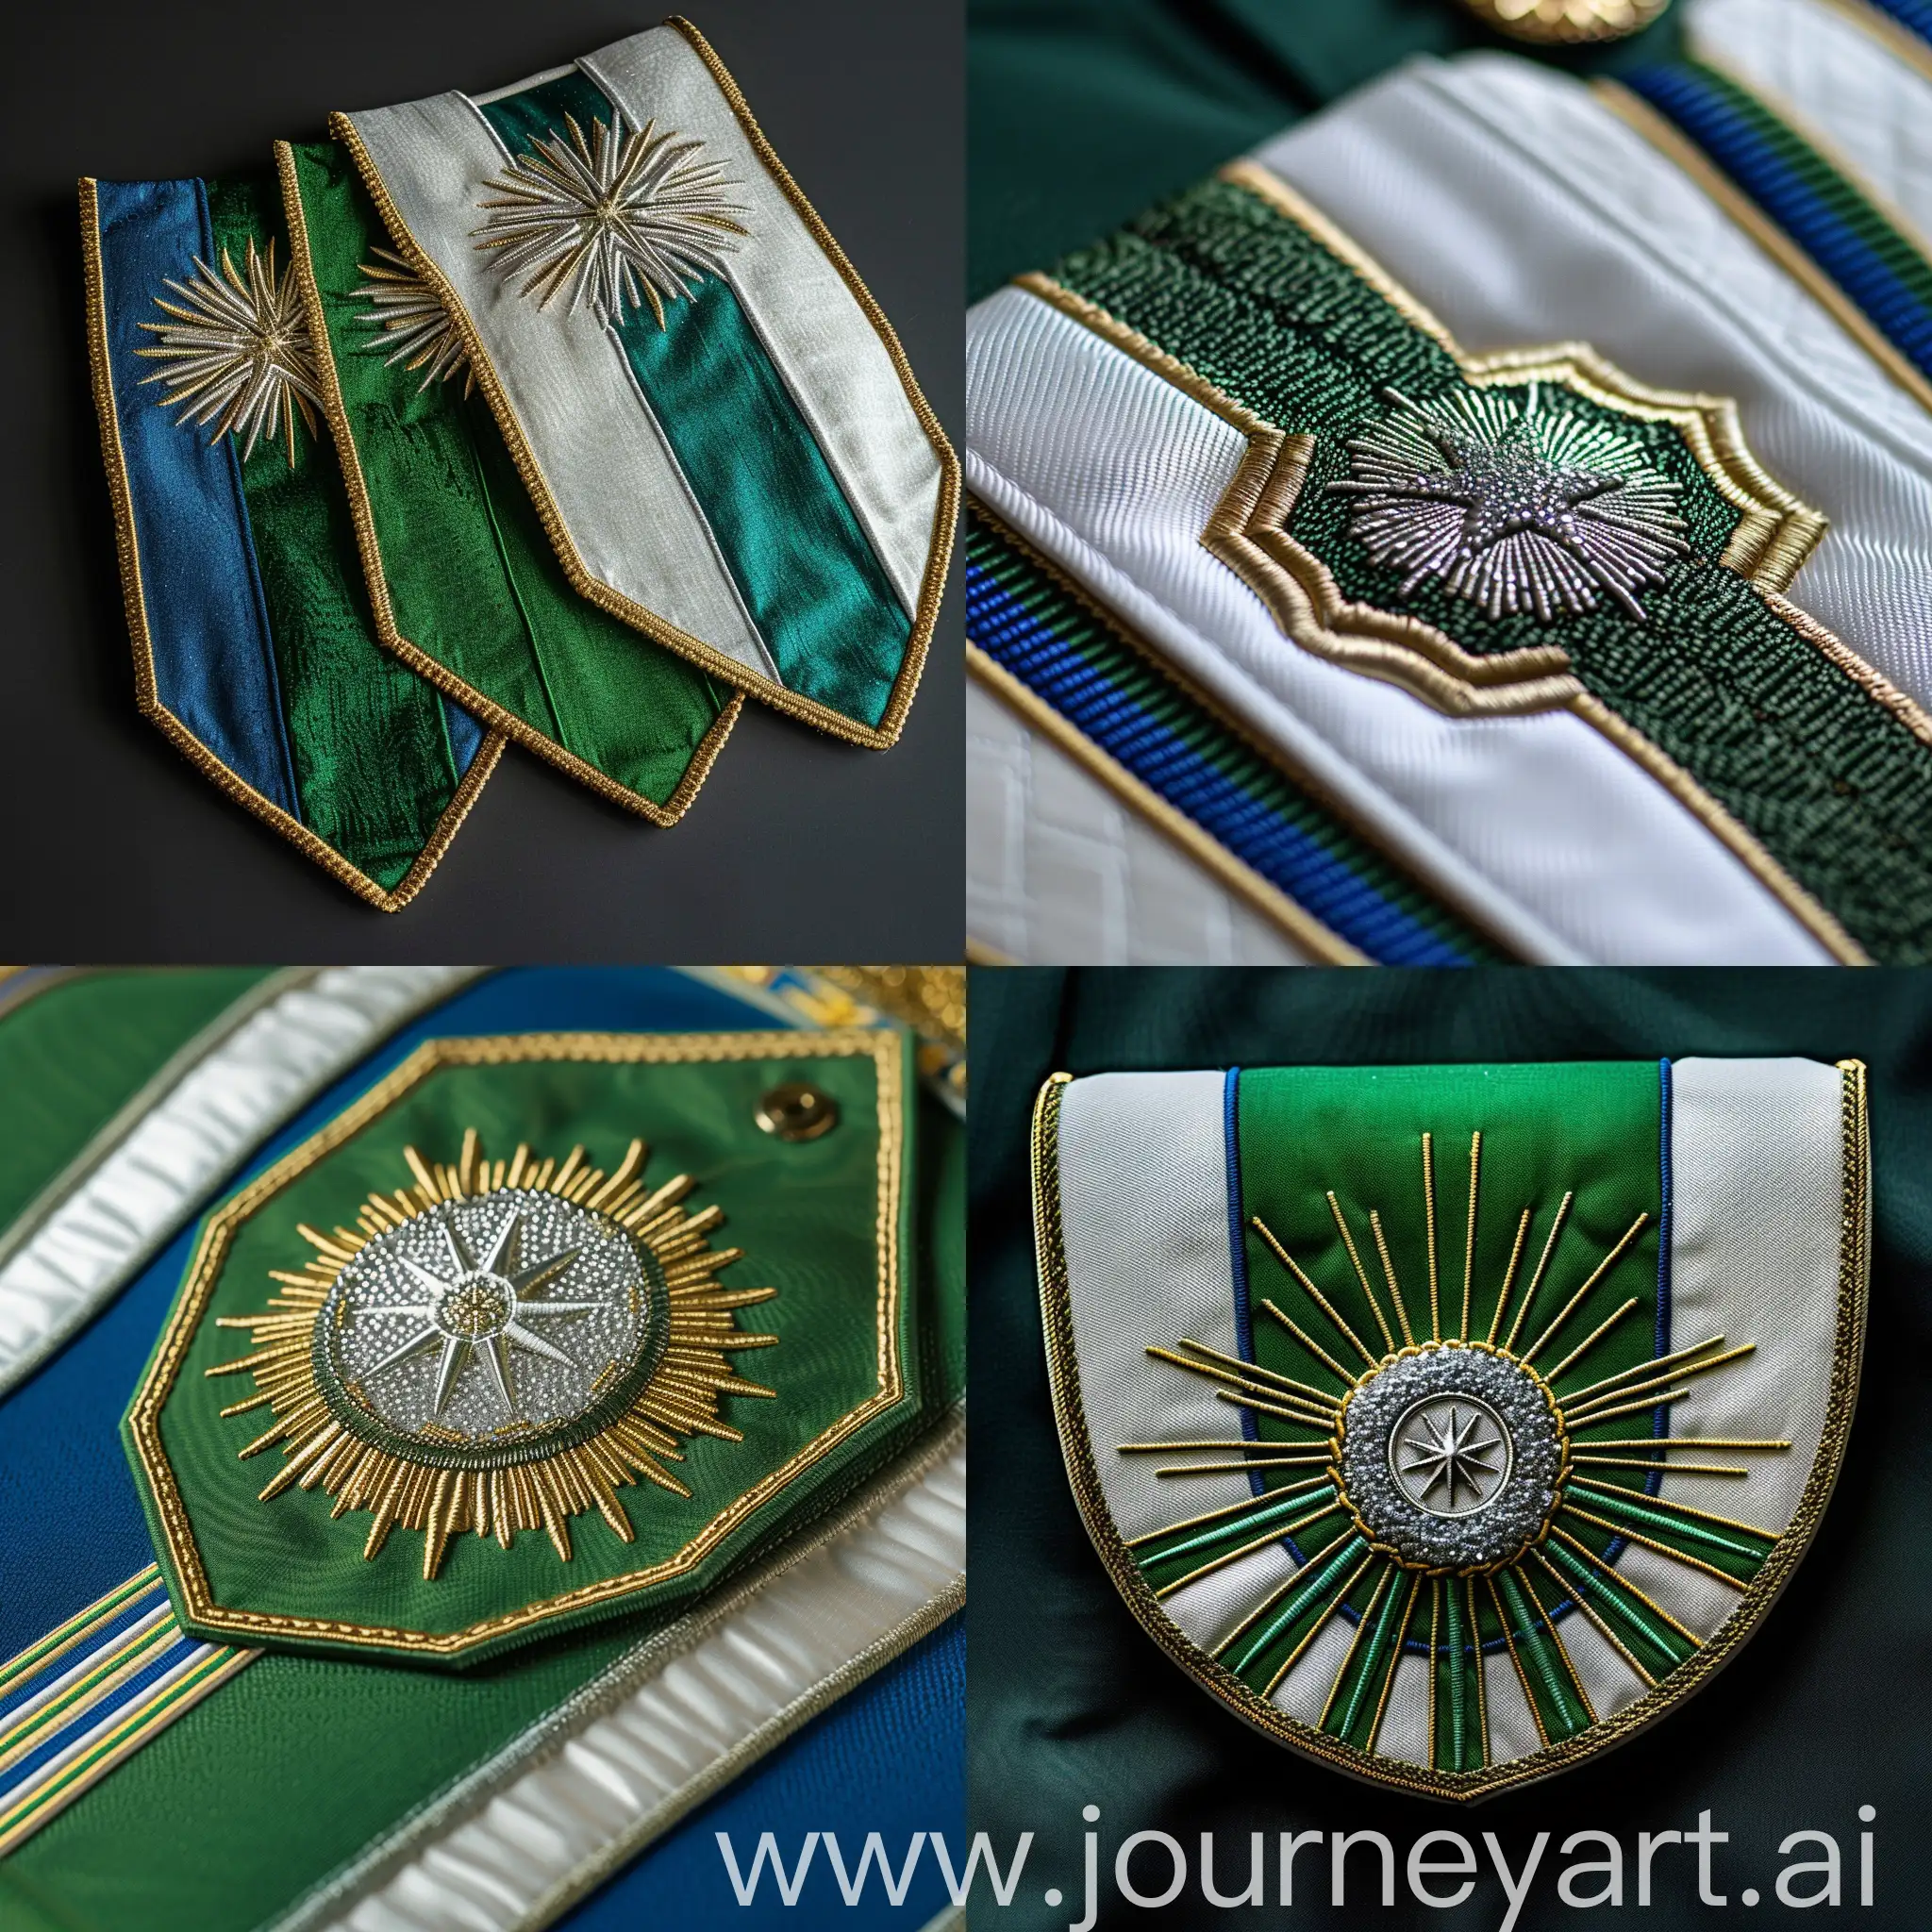 Symmetrical-Green-Epaulettes-with-Sergist-Symbolism-in-Federal-Empire-of-Ascania